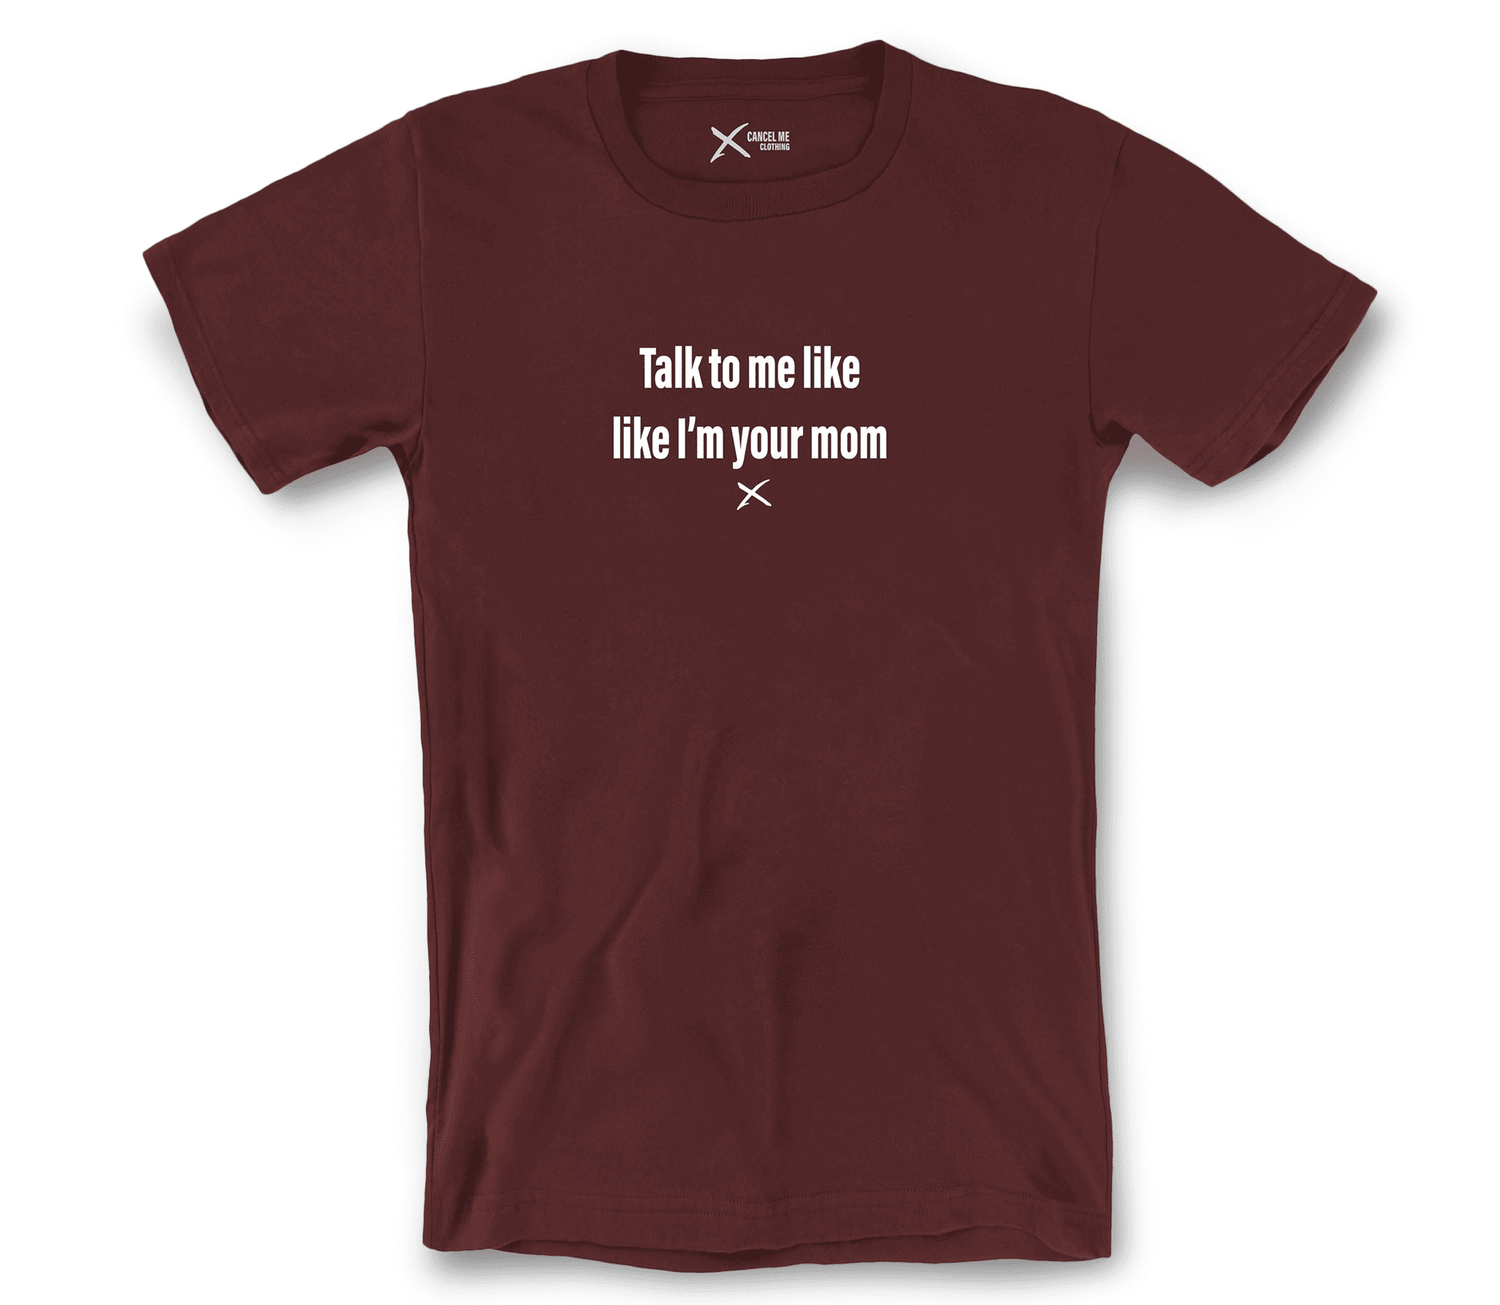 lp-sexual_3-shirt_7791817490602_talk-to-me-like-like-im-your-mom-shirt_Maroon.png